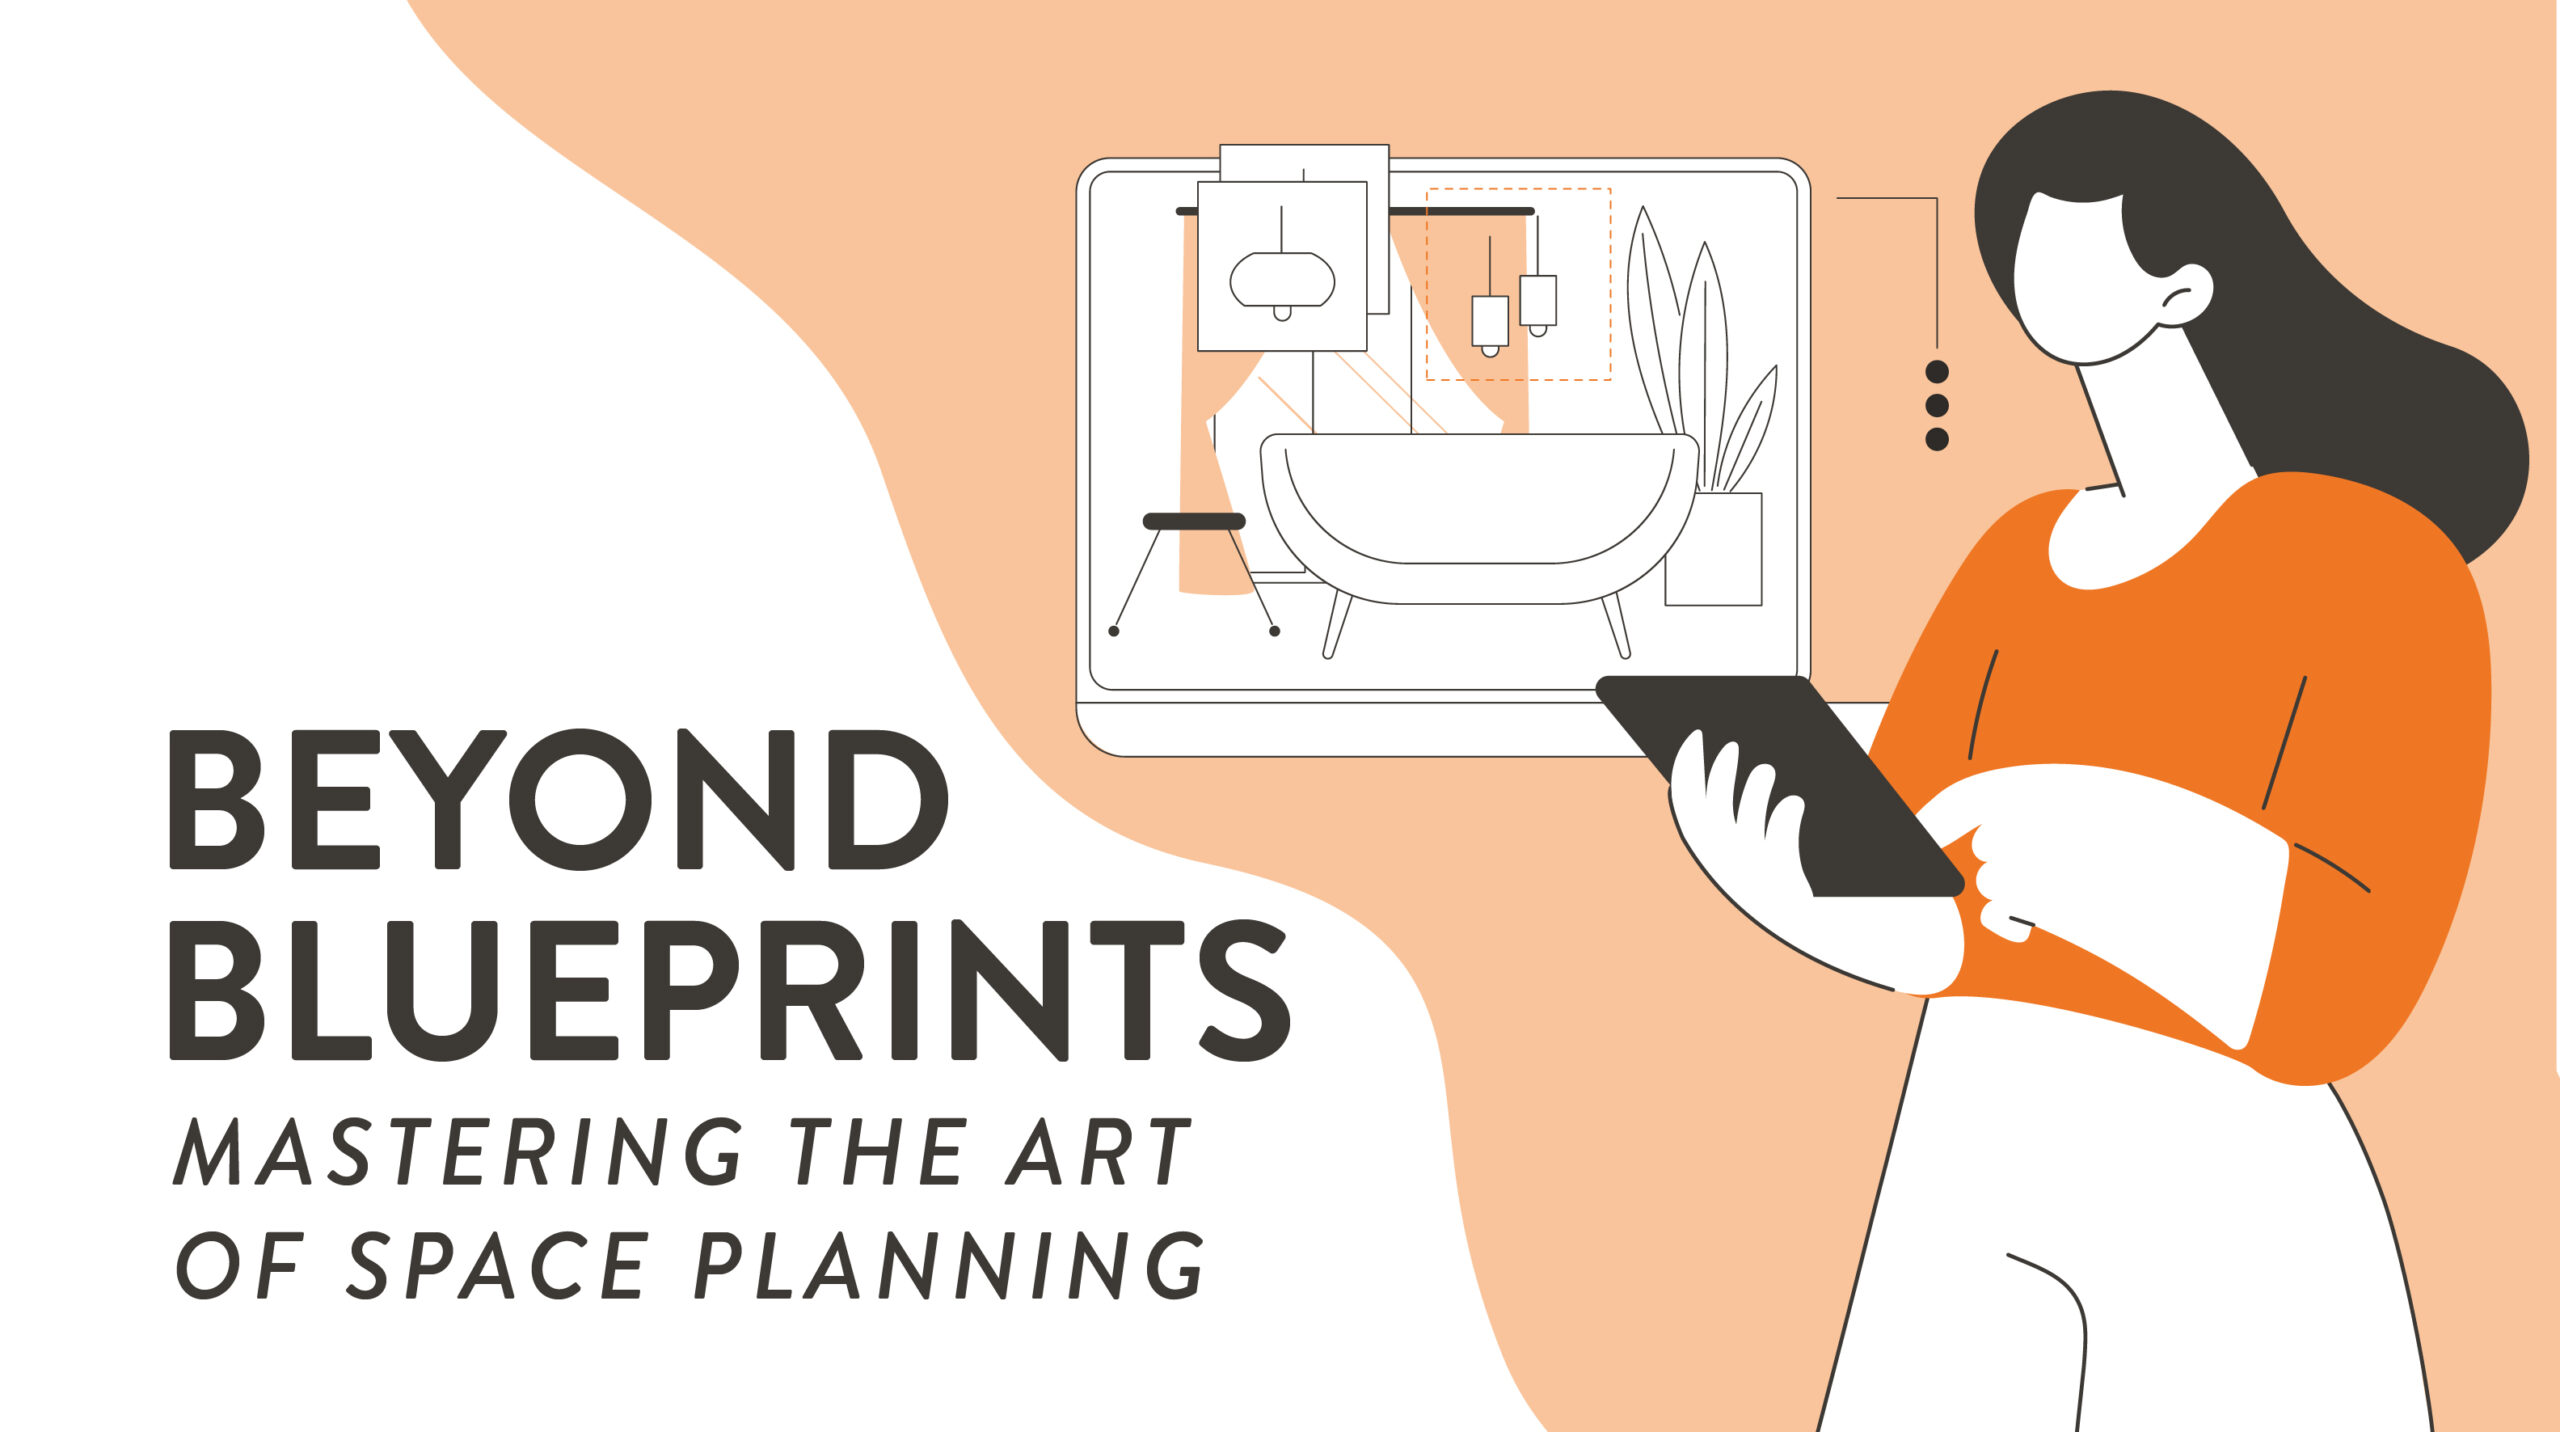 Beyond Blueprints: Mastering the Art of Space Planning